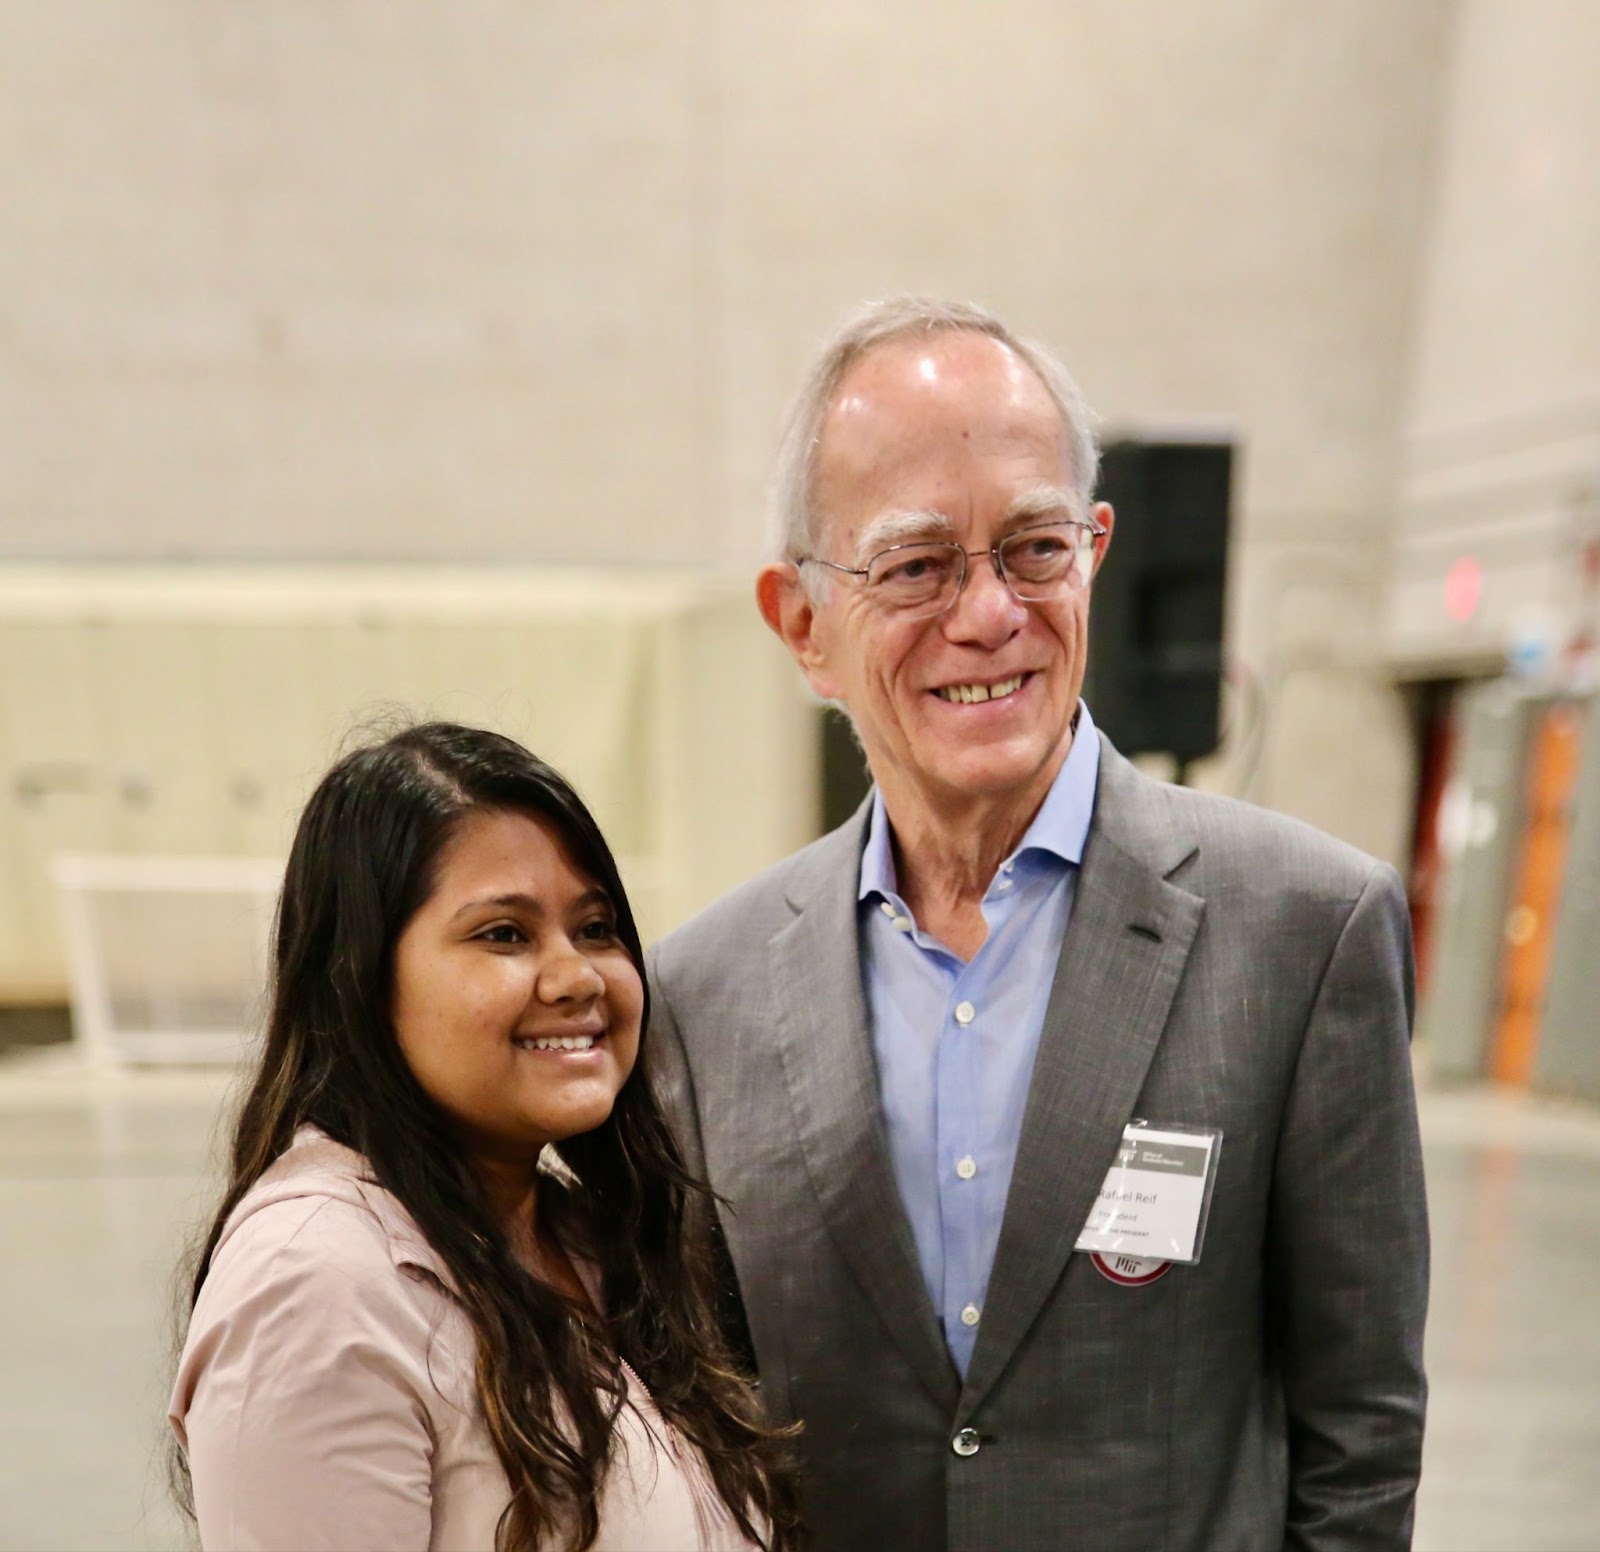 Nayantara poses, smiling, with former M.I.T. President Reif.